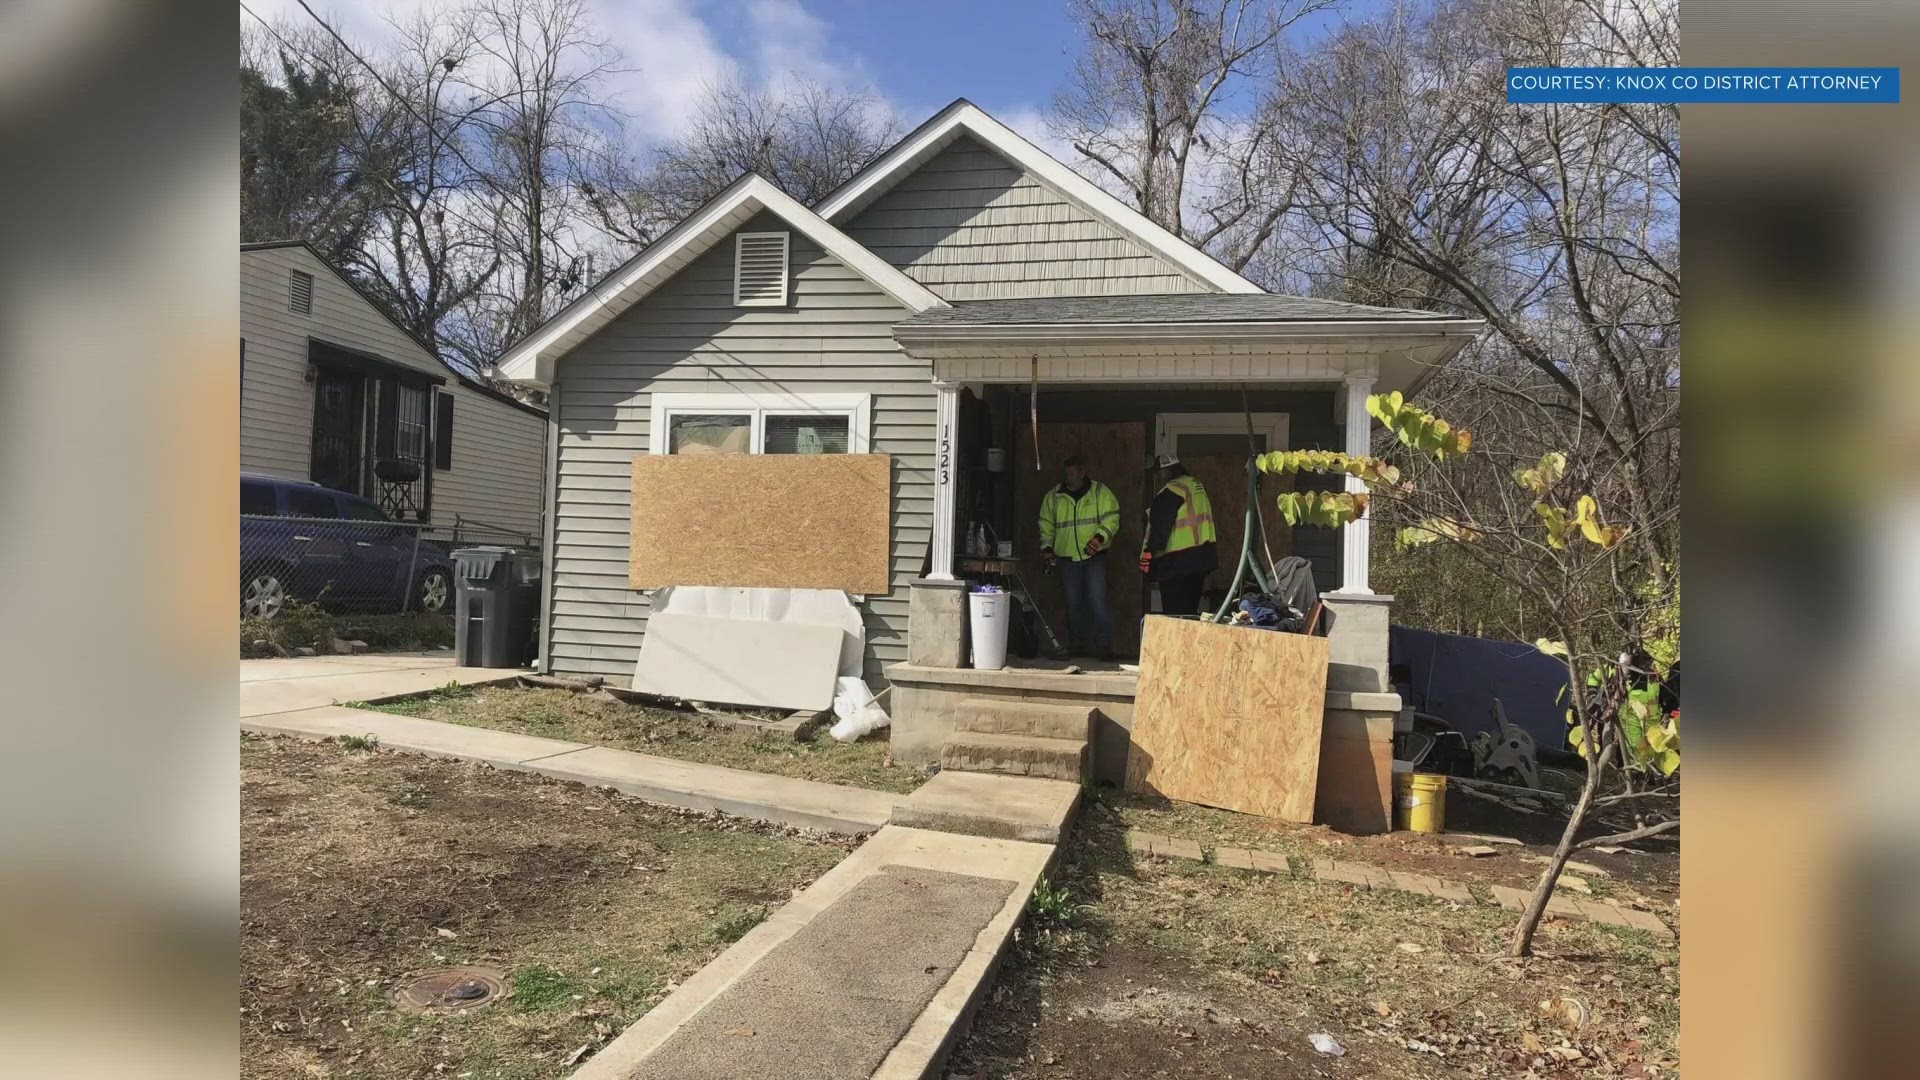 According to a release from the District Attorney General's Office, the home is located at 1523 Minnesota Avenue and was closed under state nuisance laws.